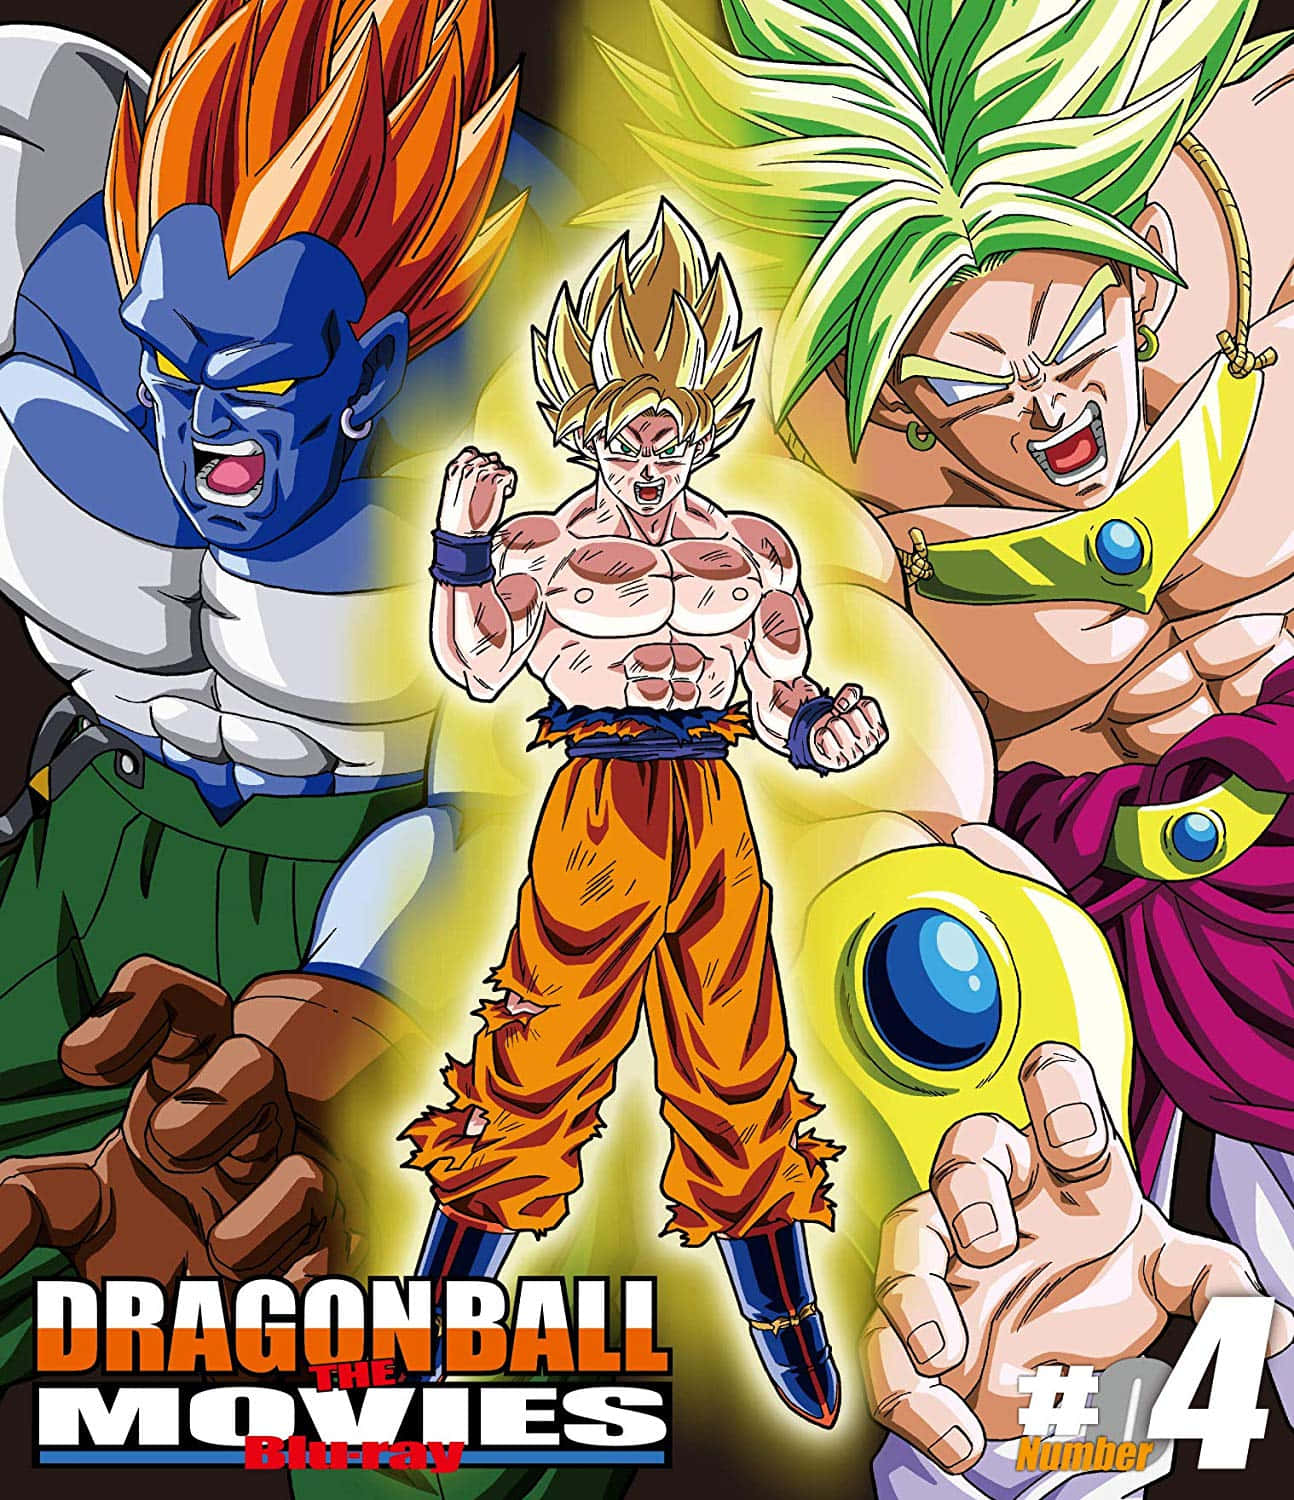 The critically acclaimed Dragon Ball movie franchise Wallpaper